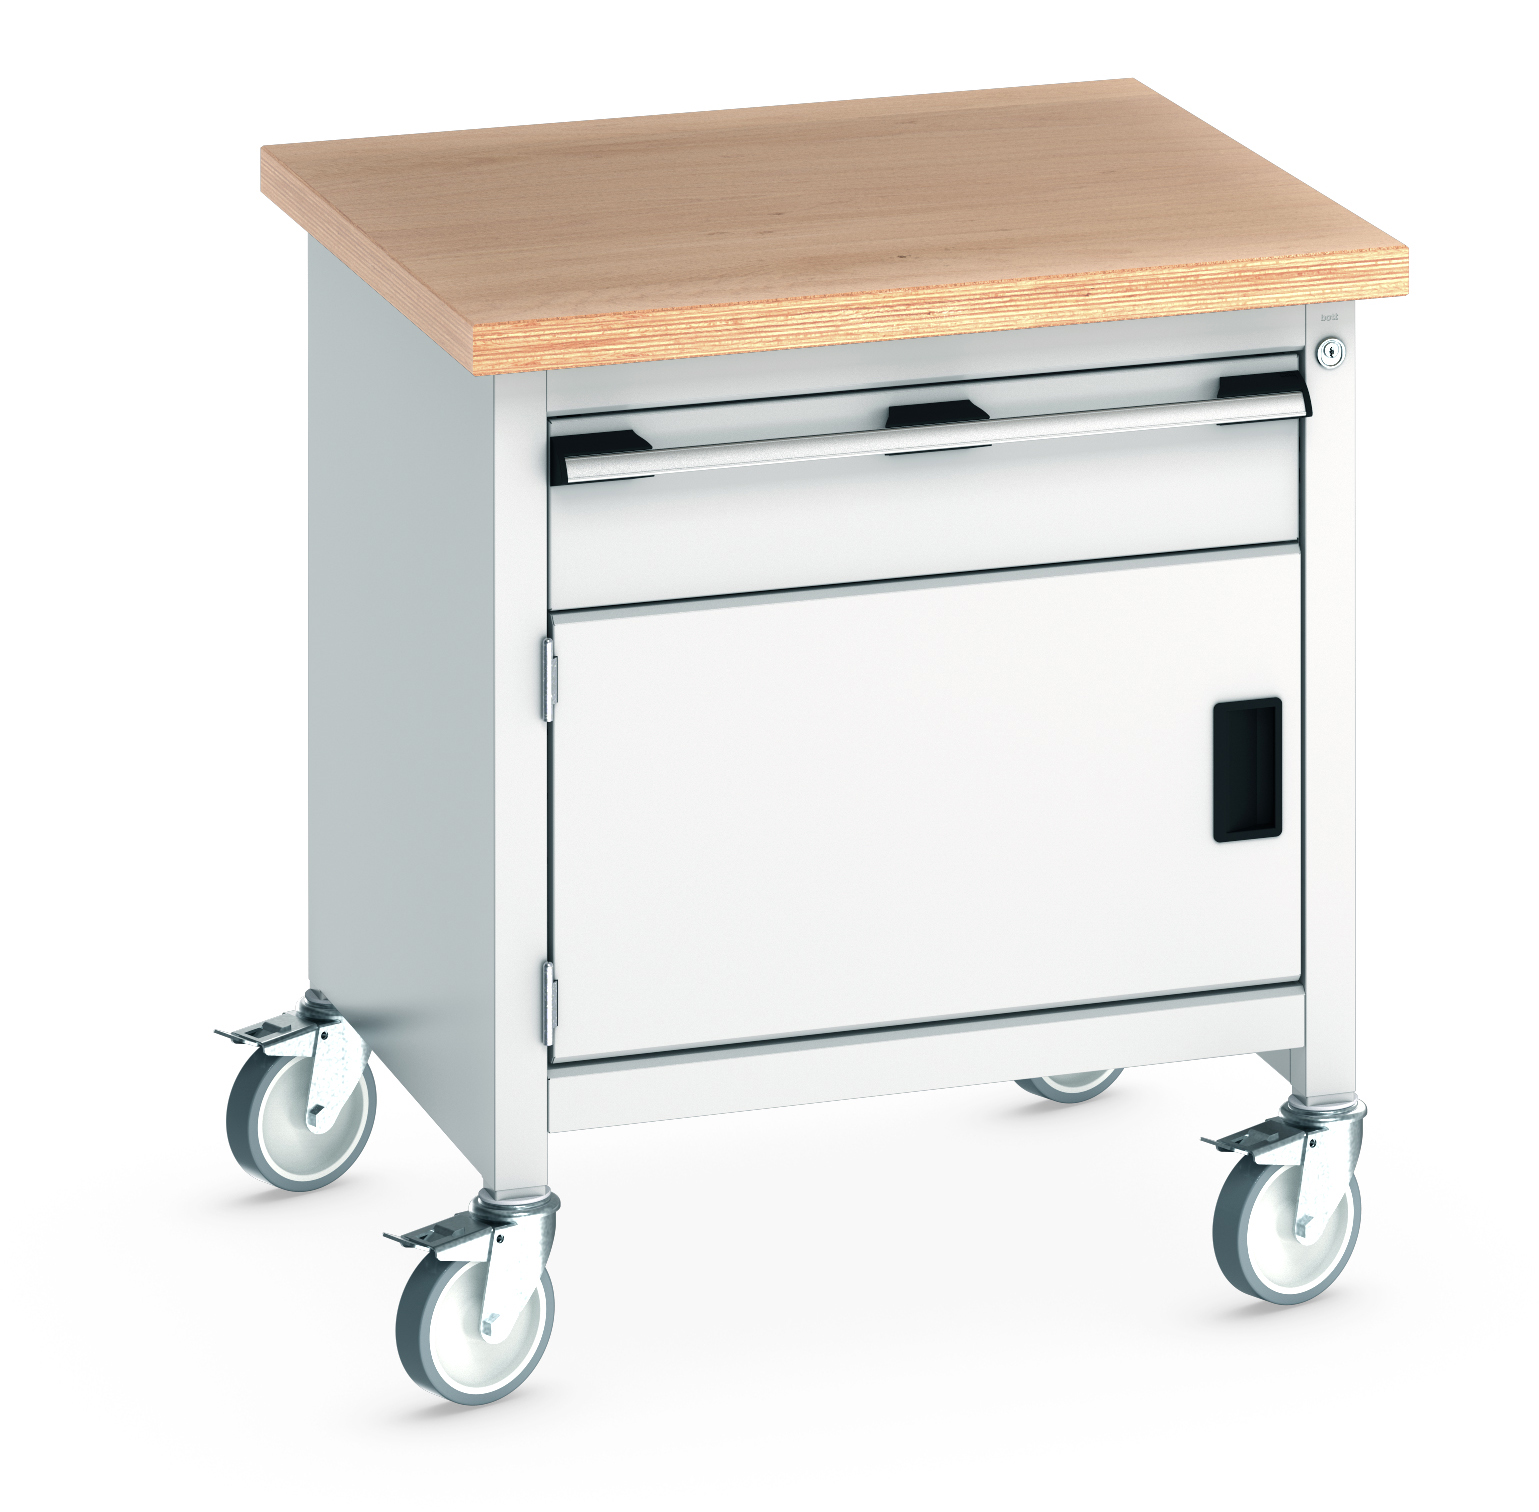 Bott Cubio Mobile Storage Bench With 1 Drawer - Full Cupboard - 41002088.16V